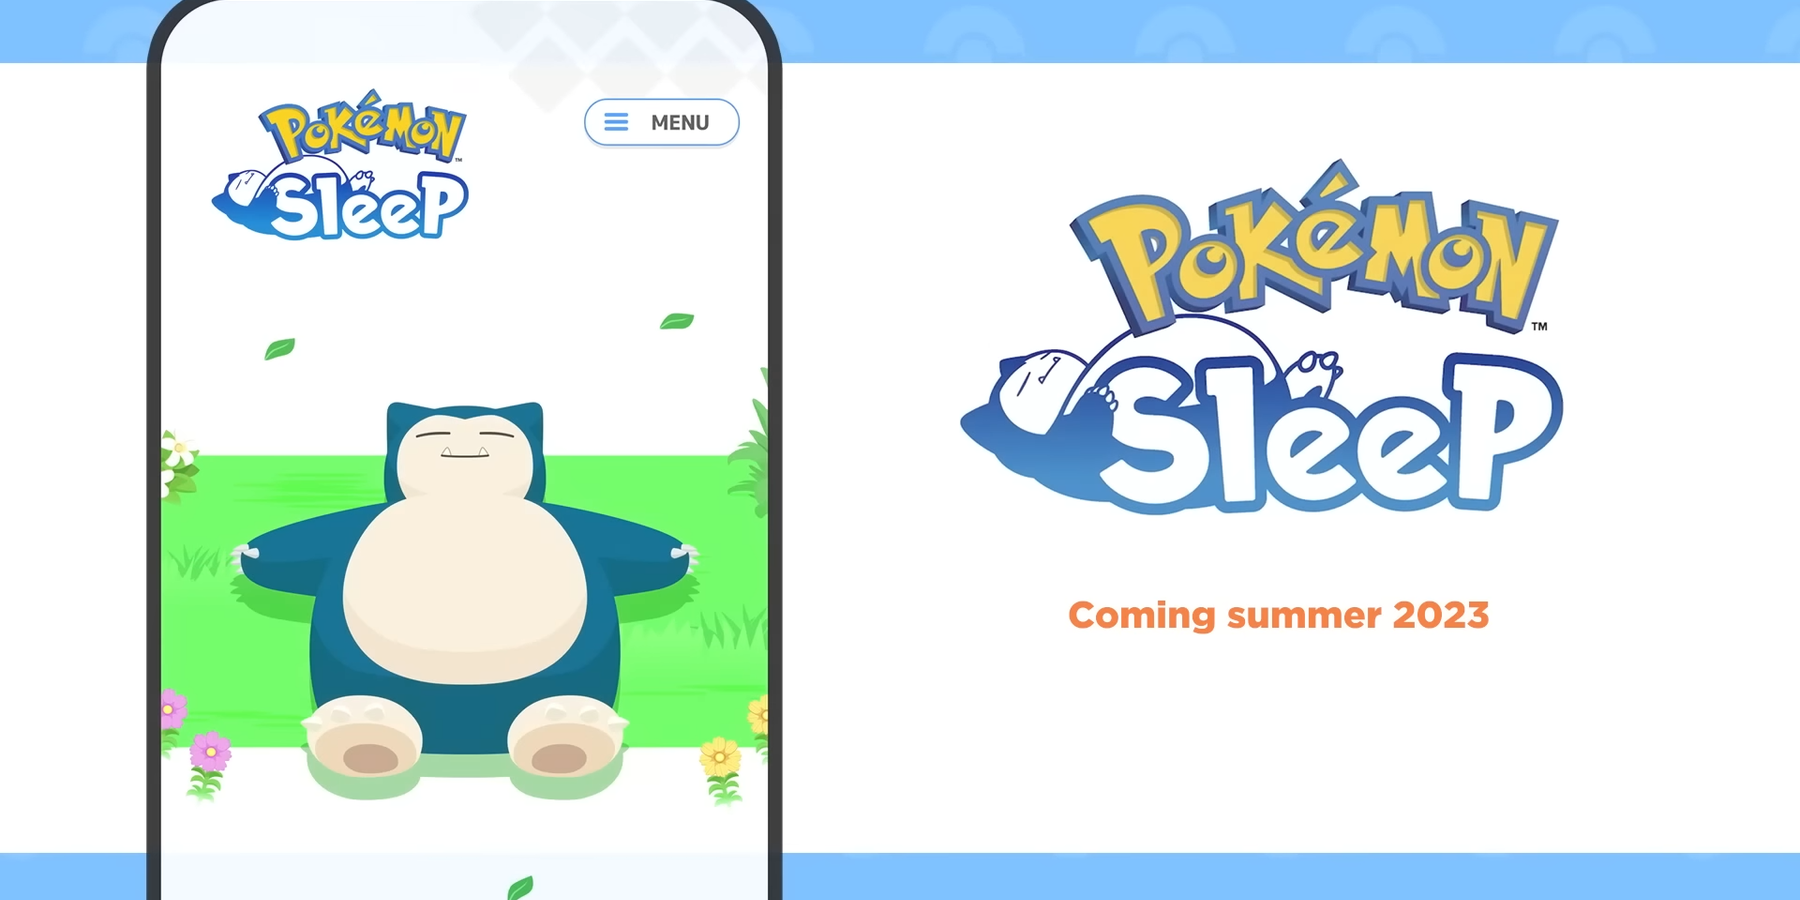 Pokemon Sleep Release In Summer 2023, image of the app screen with a sleeping Snorlax and the logo.